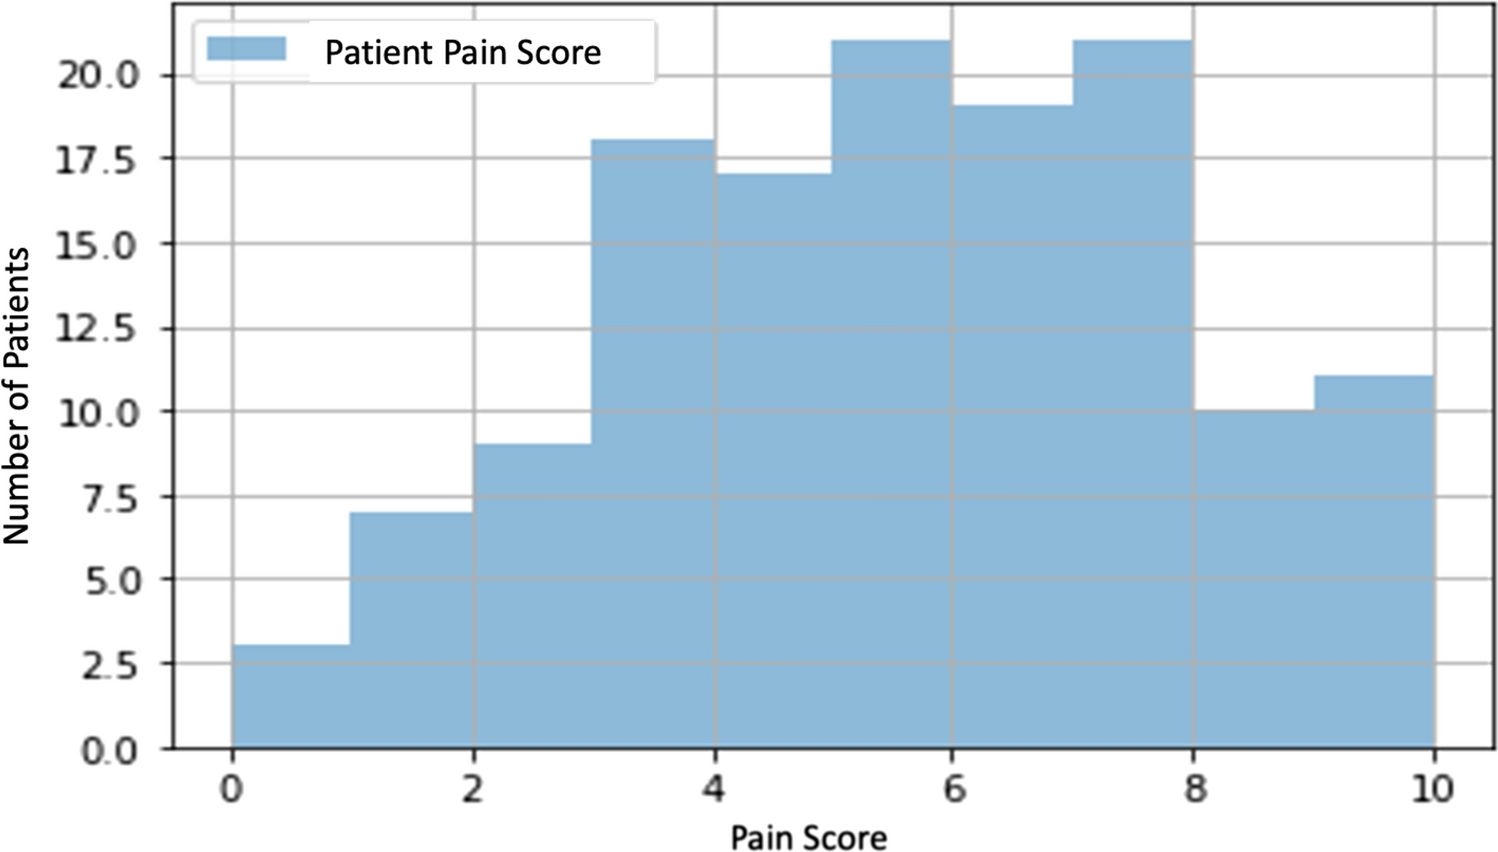 Comorbidities are not associated with pain symptom or recurrence in patients with pilonidal disease